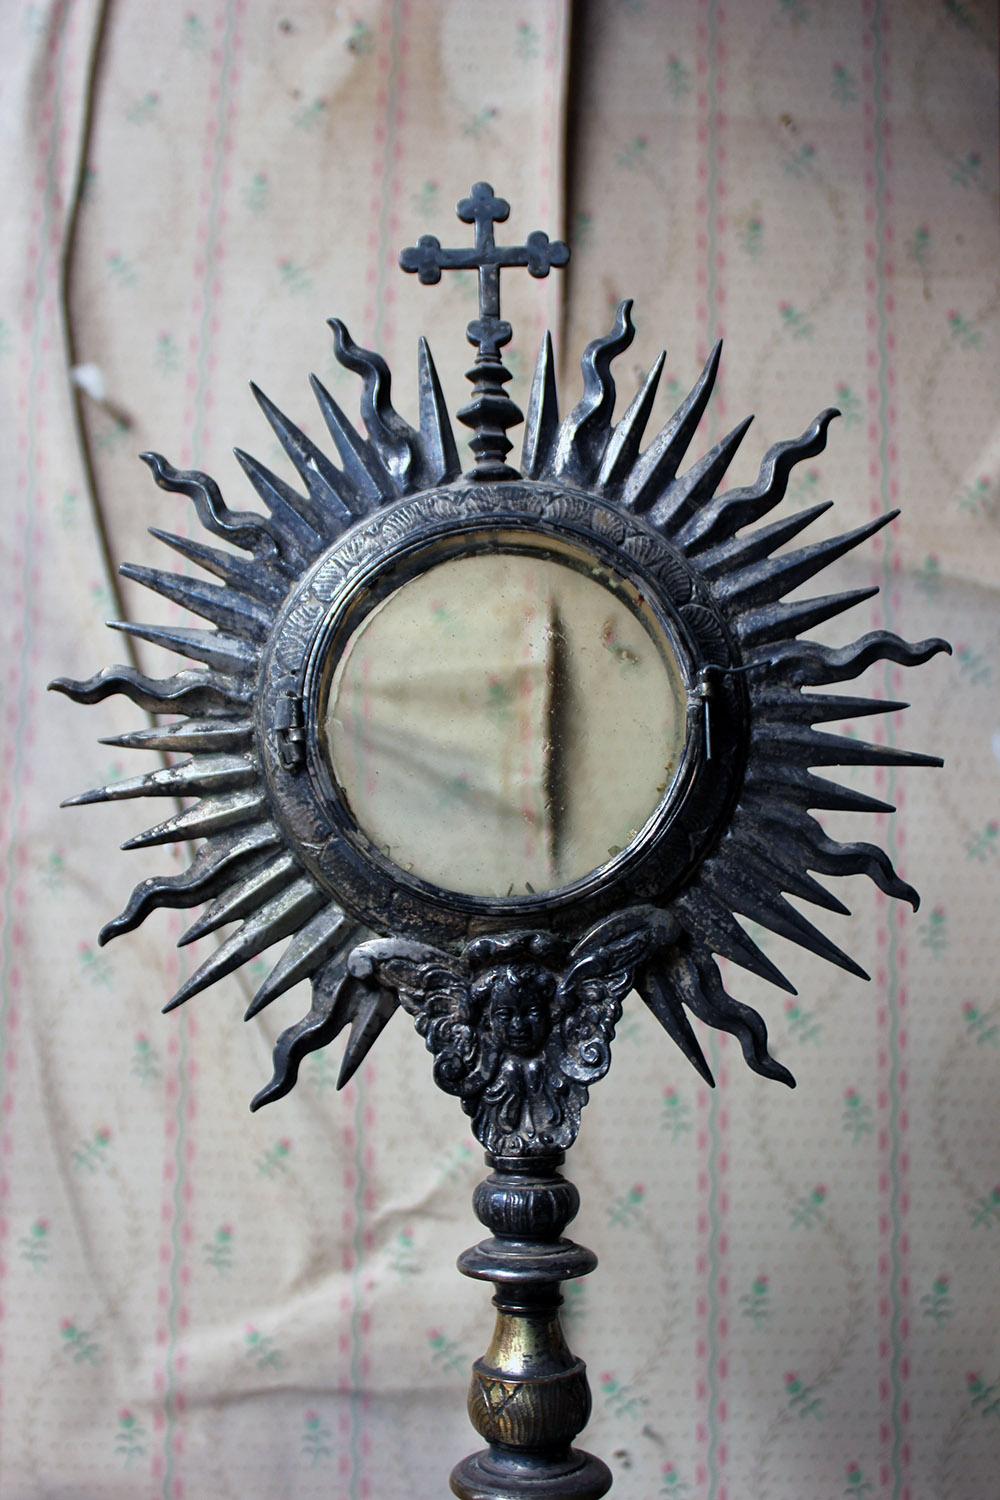 monstrance meaning